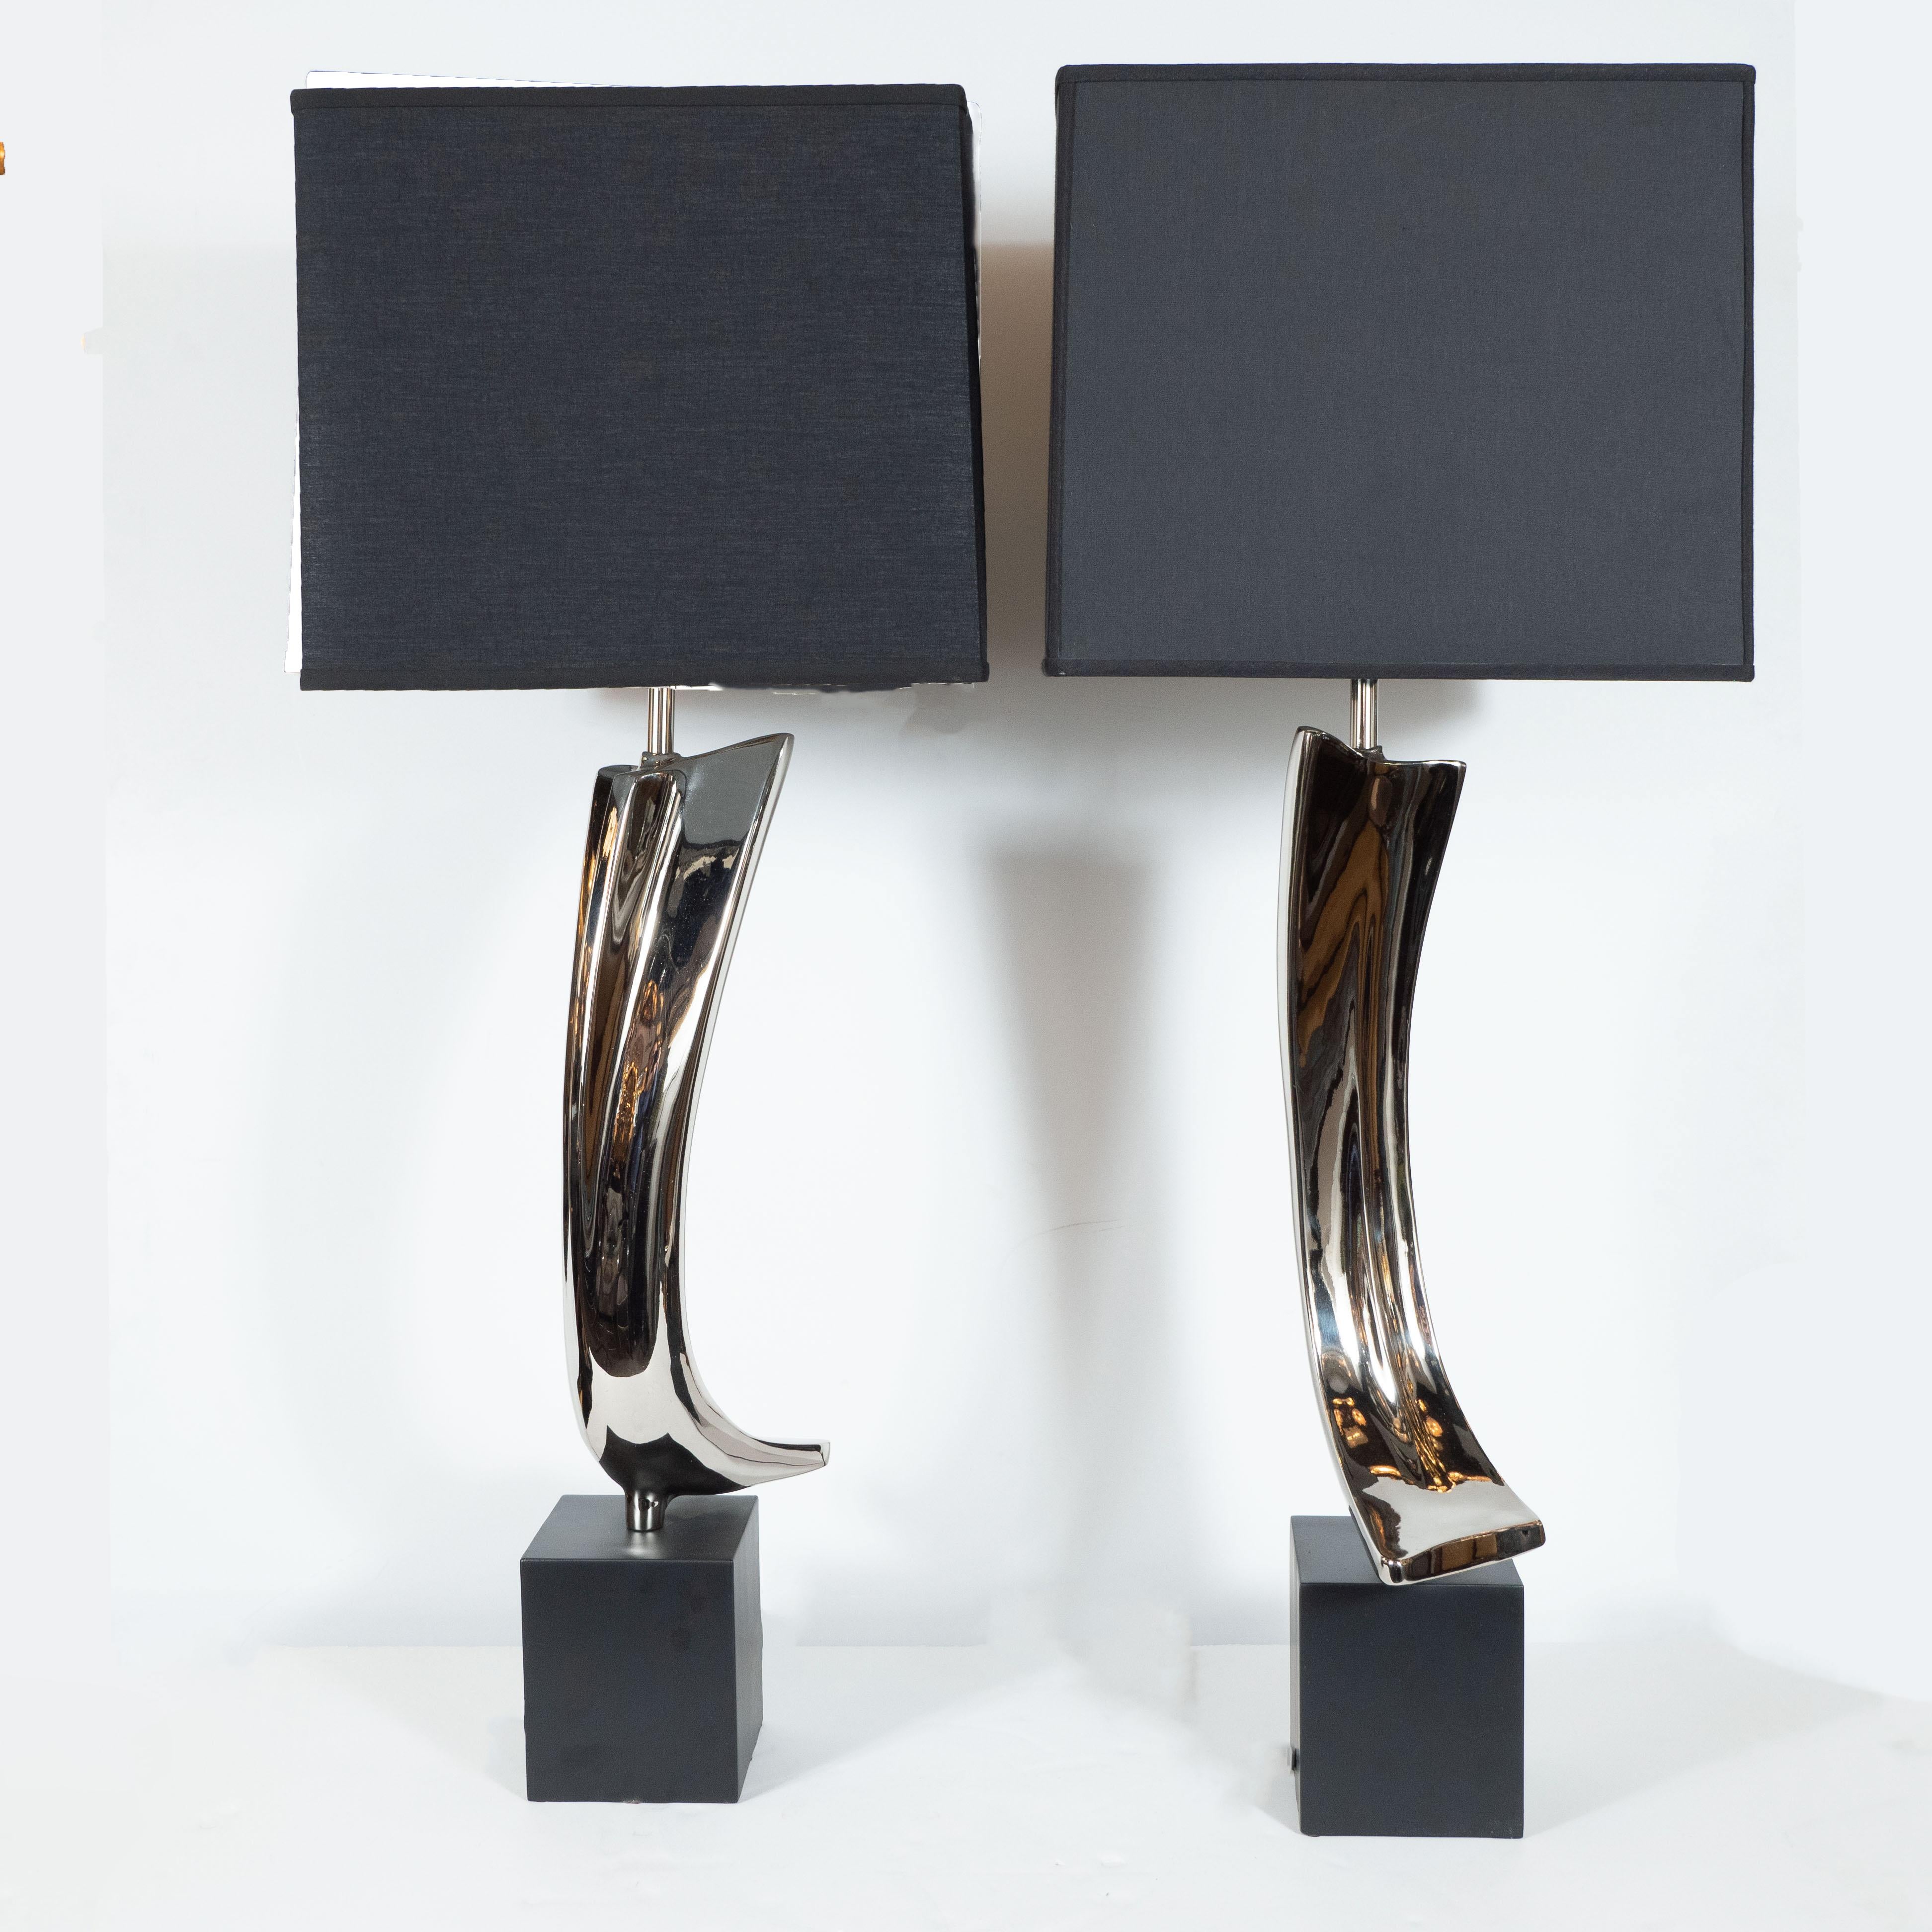 Pair of Midcentury Brutalist Table Lamps for Laurel Lamp Co. In Excellent Condition For Sale In New York, NY